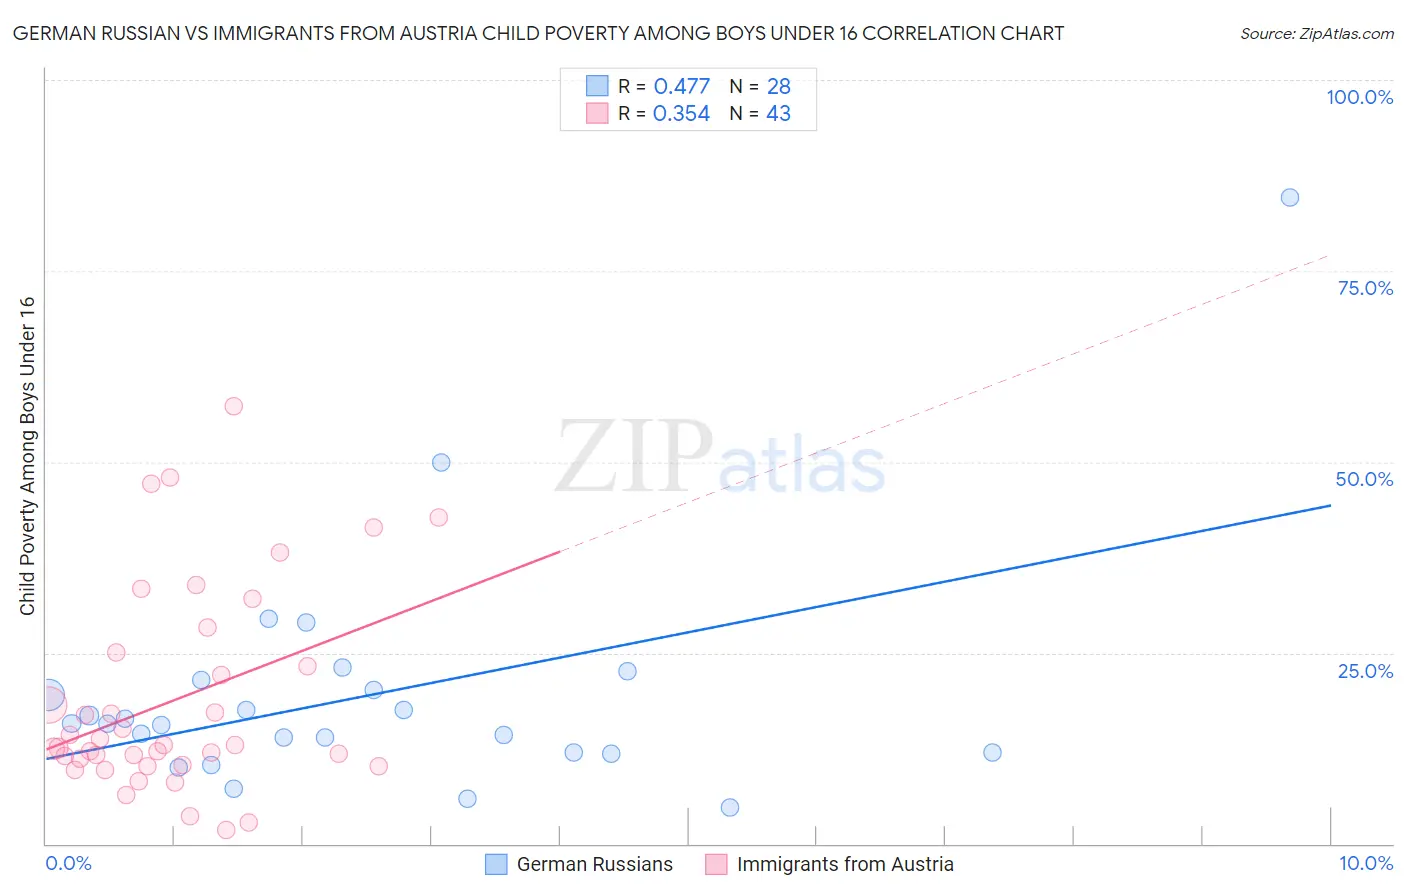 German Russian vs Immigrants from Austria Child Poverty Among Boys Under 16